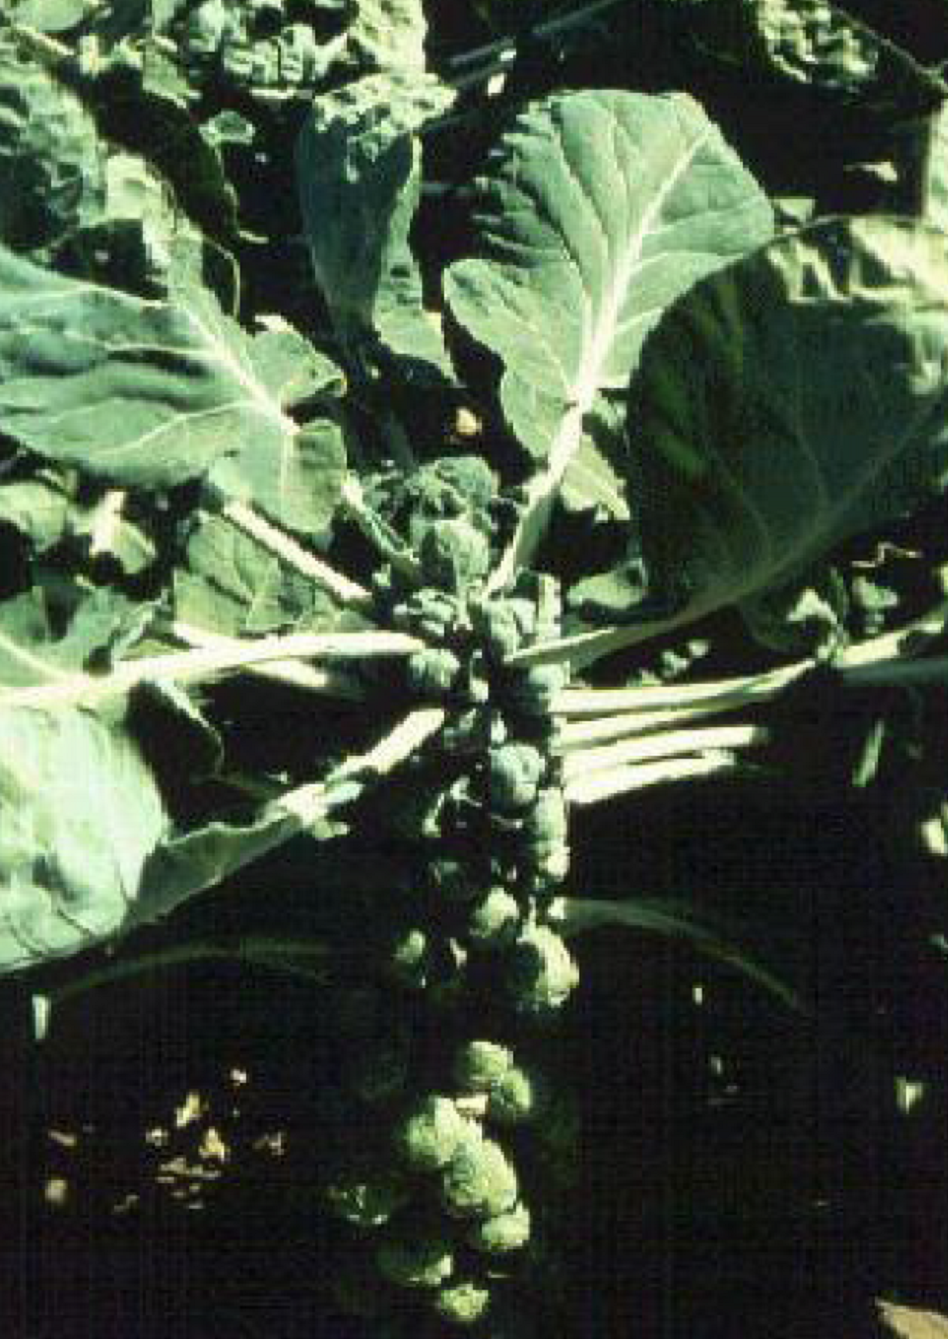 Brussels Sprouts Can Change Gardening Minds,….and Taste Buds